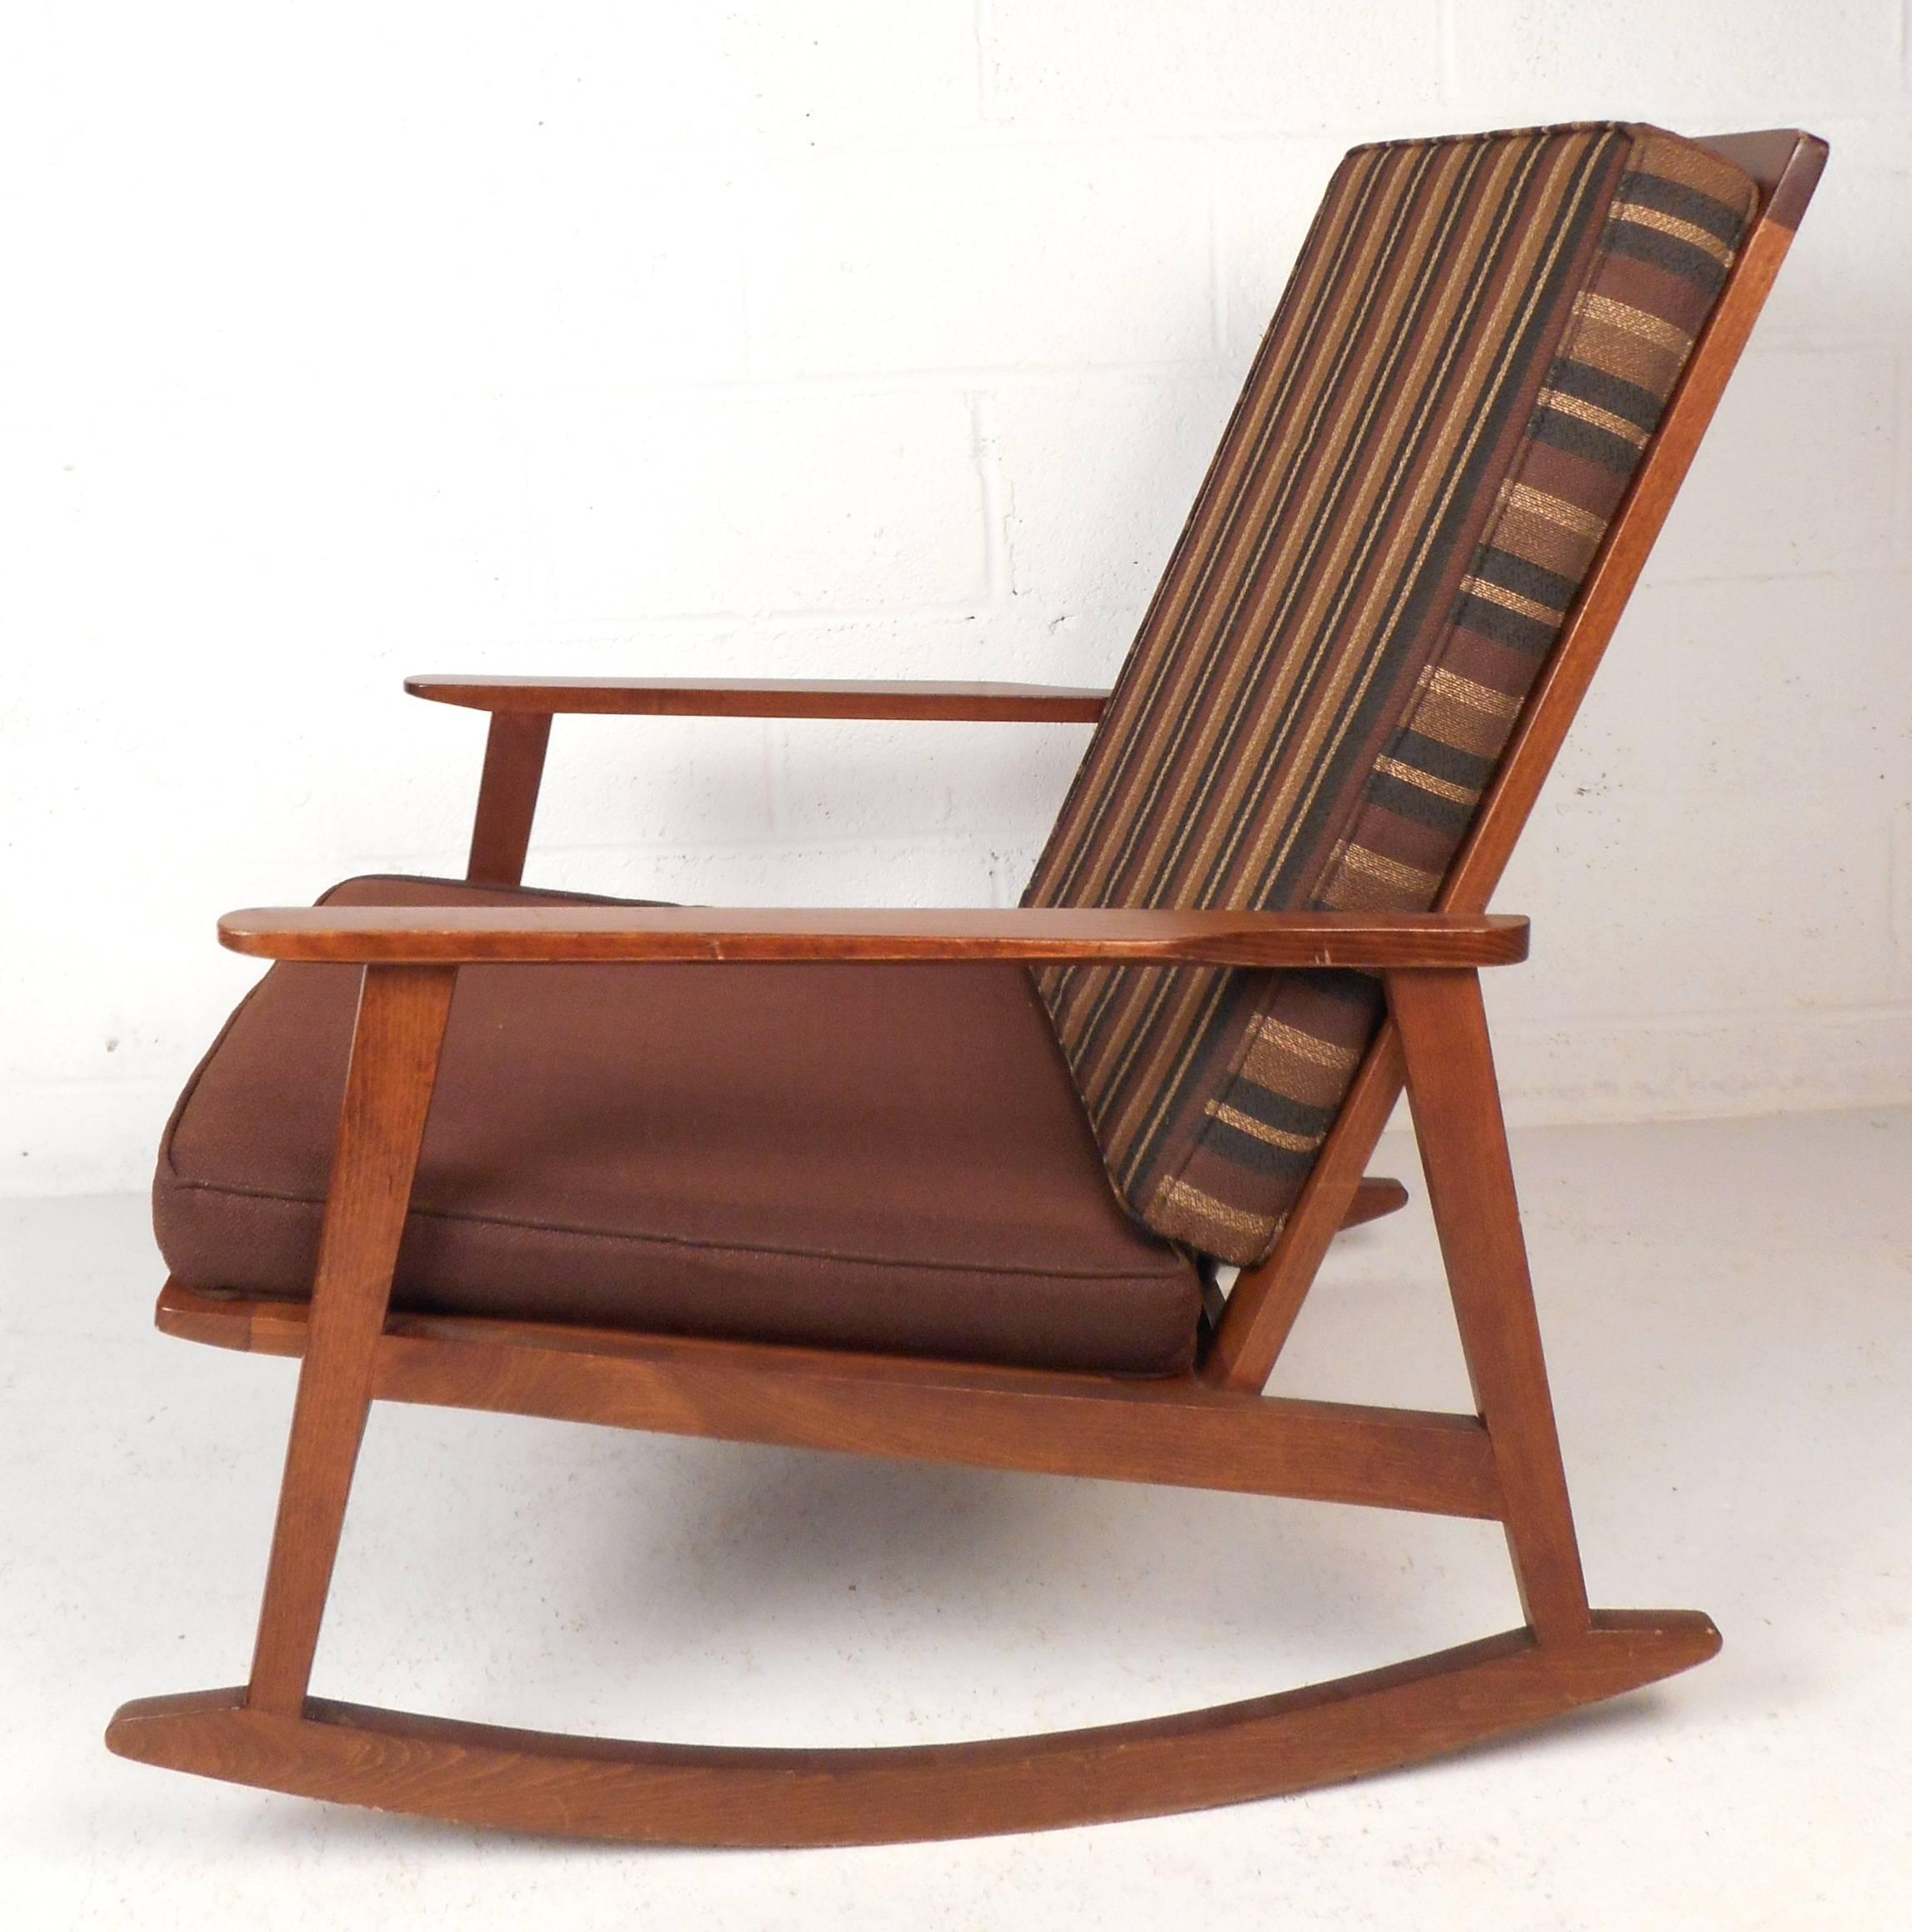 Lovely Mid-Century Modern rocking chair features a vintage walnut finish and sculpted arm rests. Sleek design with a smooth rocking motion. The unique high spindle backrest, vintage upholstery, and thick cushions are sure to compliment any modern